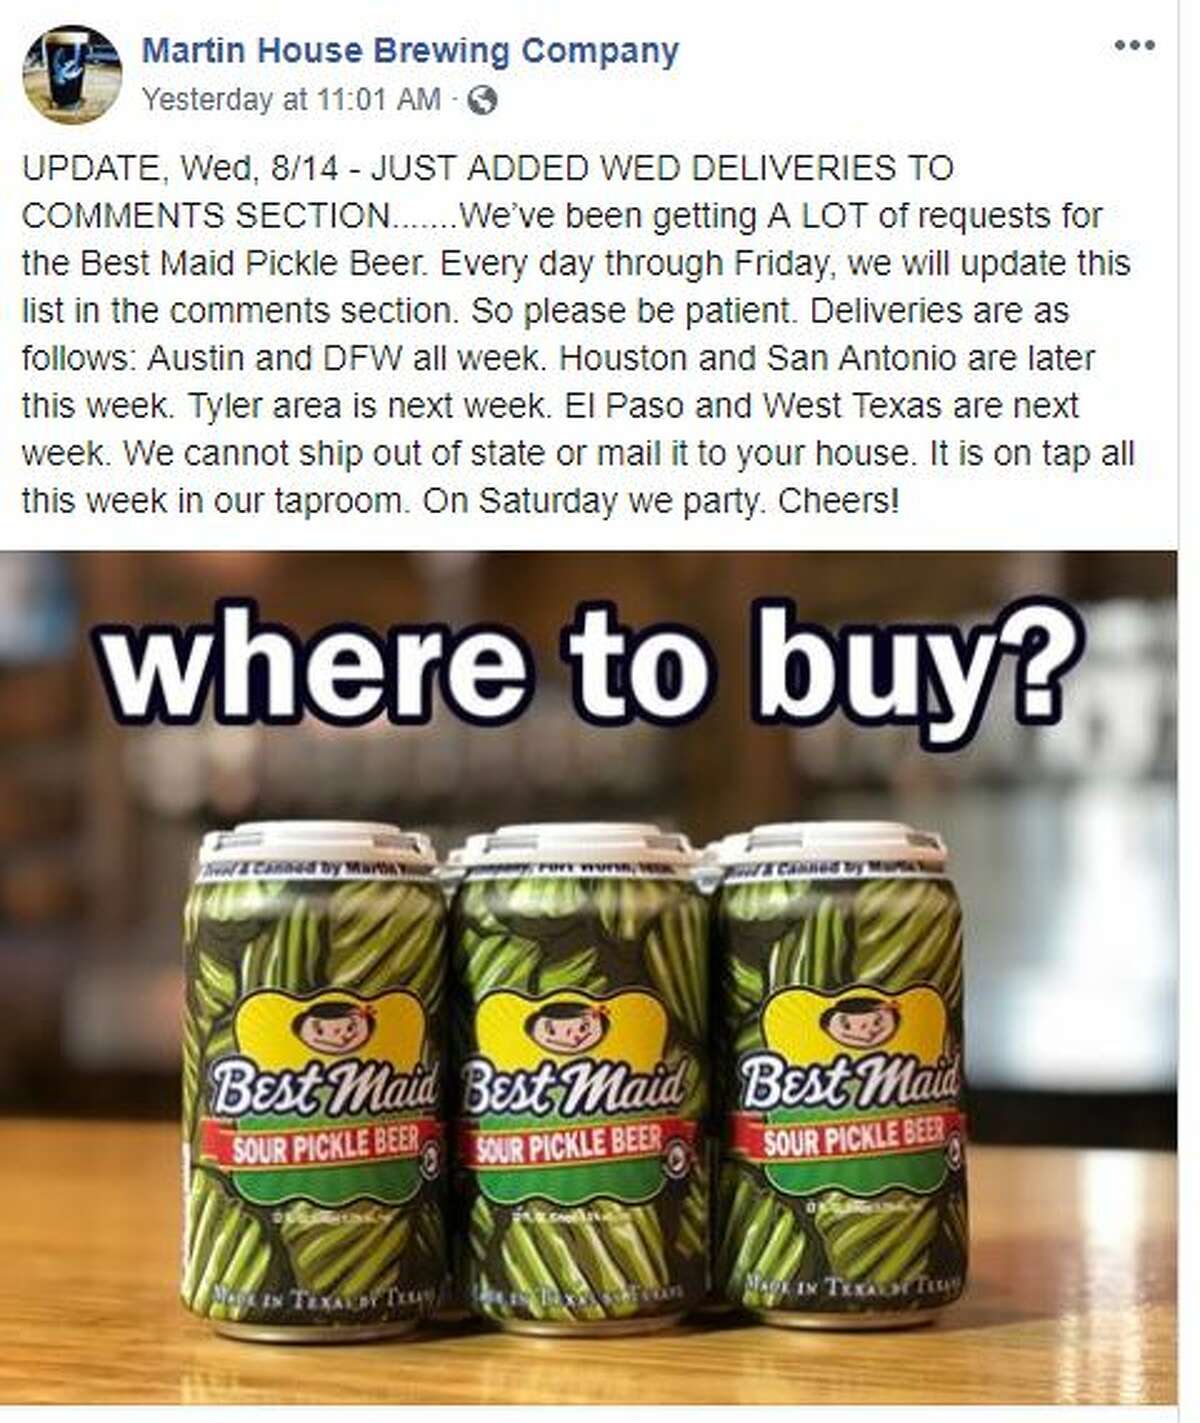 "The Sour Pickle Beer is set to starting hitting store shelves TODAY! Check out this Martin House Brewing Company post to see where to buy near you!"